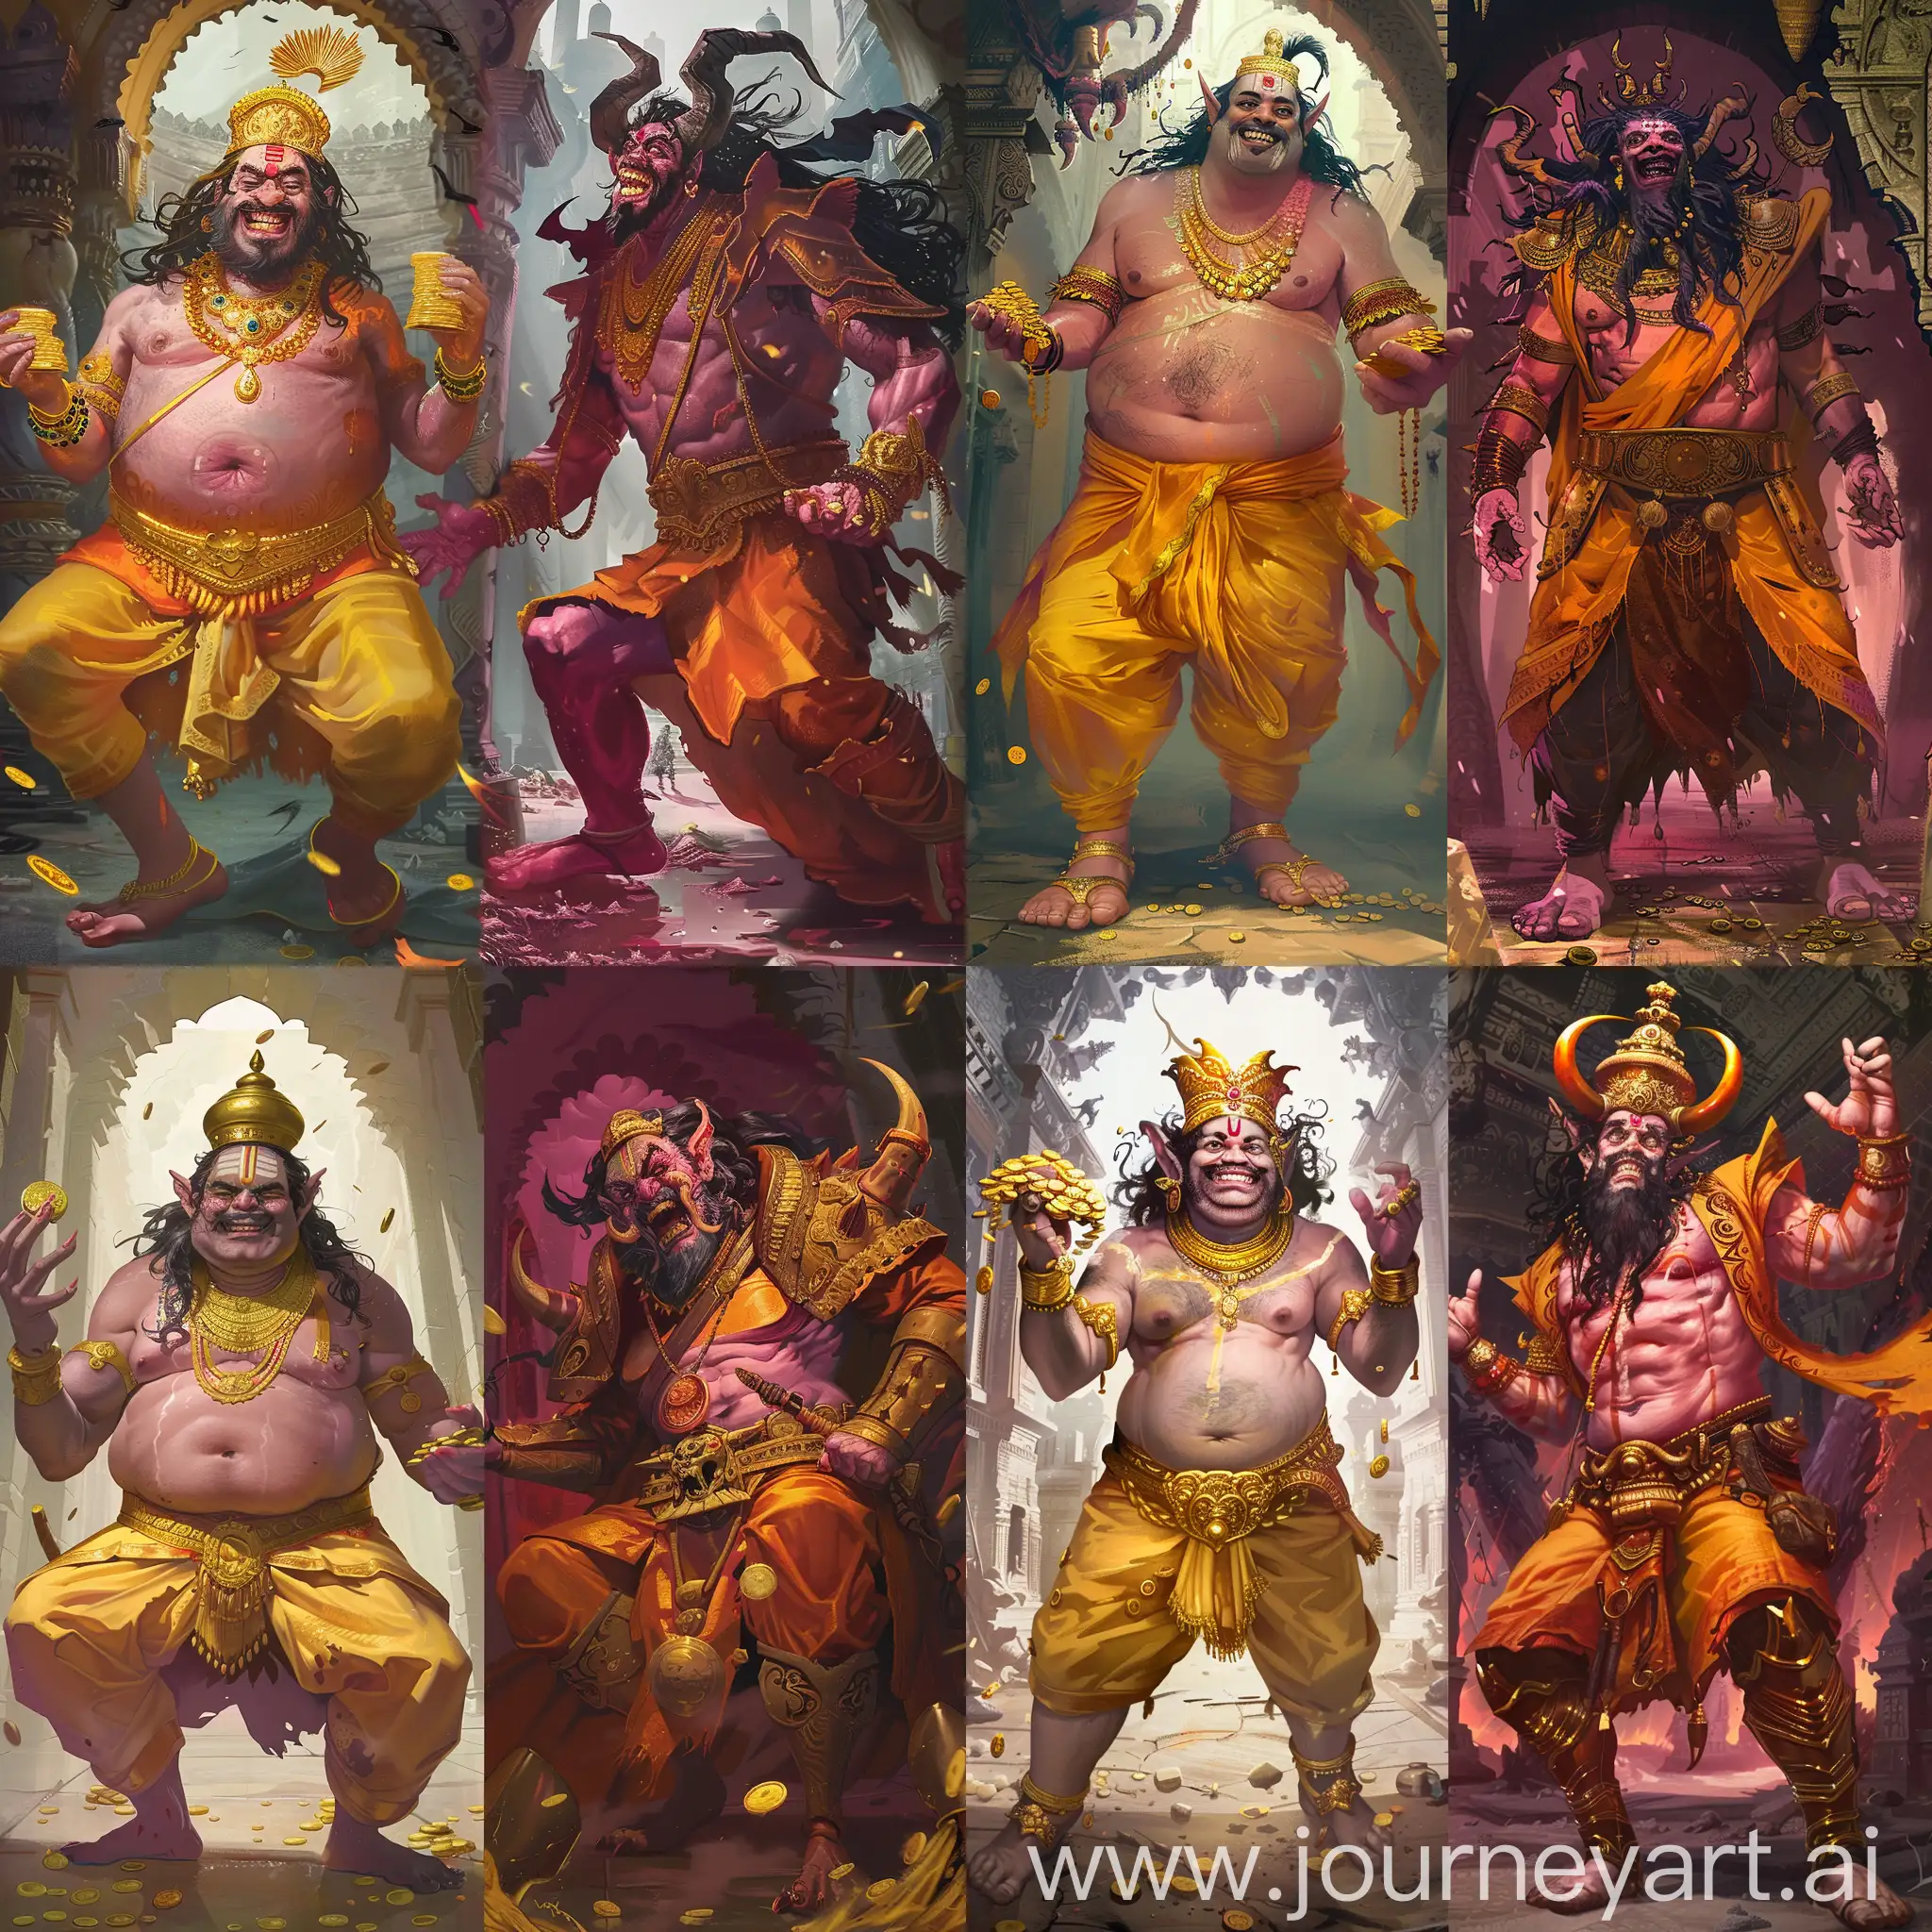 At left, a chubby middle-aged ancient Indian lord Kubera, he doesn't have any beard, he has pale skin,  he has a golden crown and long black hair, he has yellow clothes and pants, he is smiling and he holds golden coins in his hands.

At right, an ancient Hindu demon king Ravana, this demon king has magenta color skin, long black hair and beard, wears brown orange color armor and boots.

They are all inside a creepy and terrible Hindu demon temple.